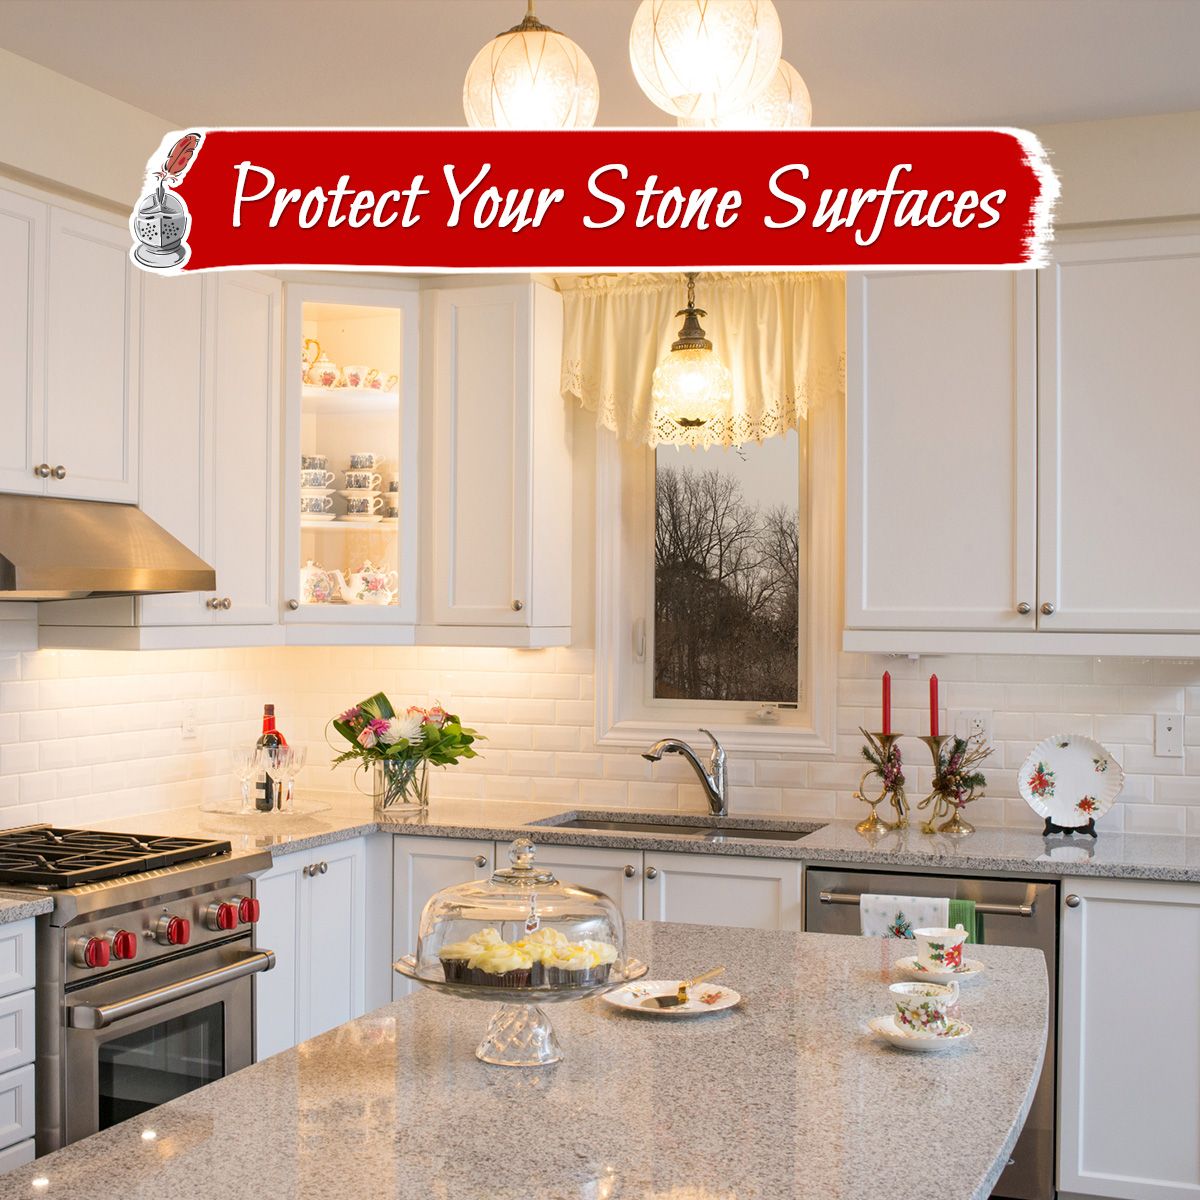 Protect Your Stone Surfaces